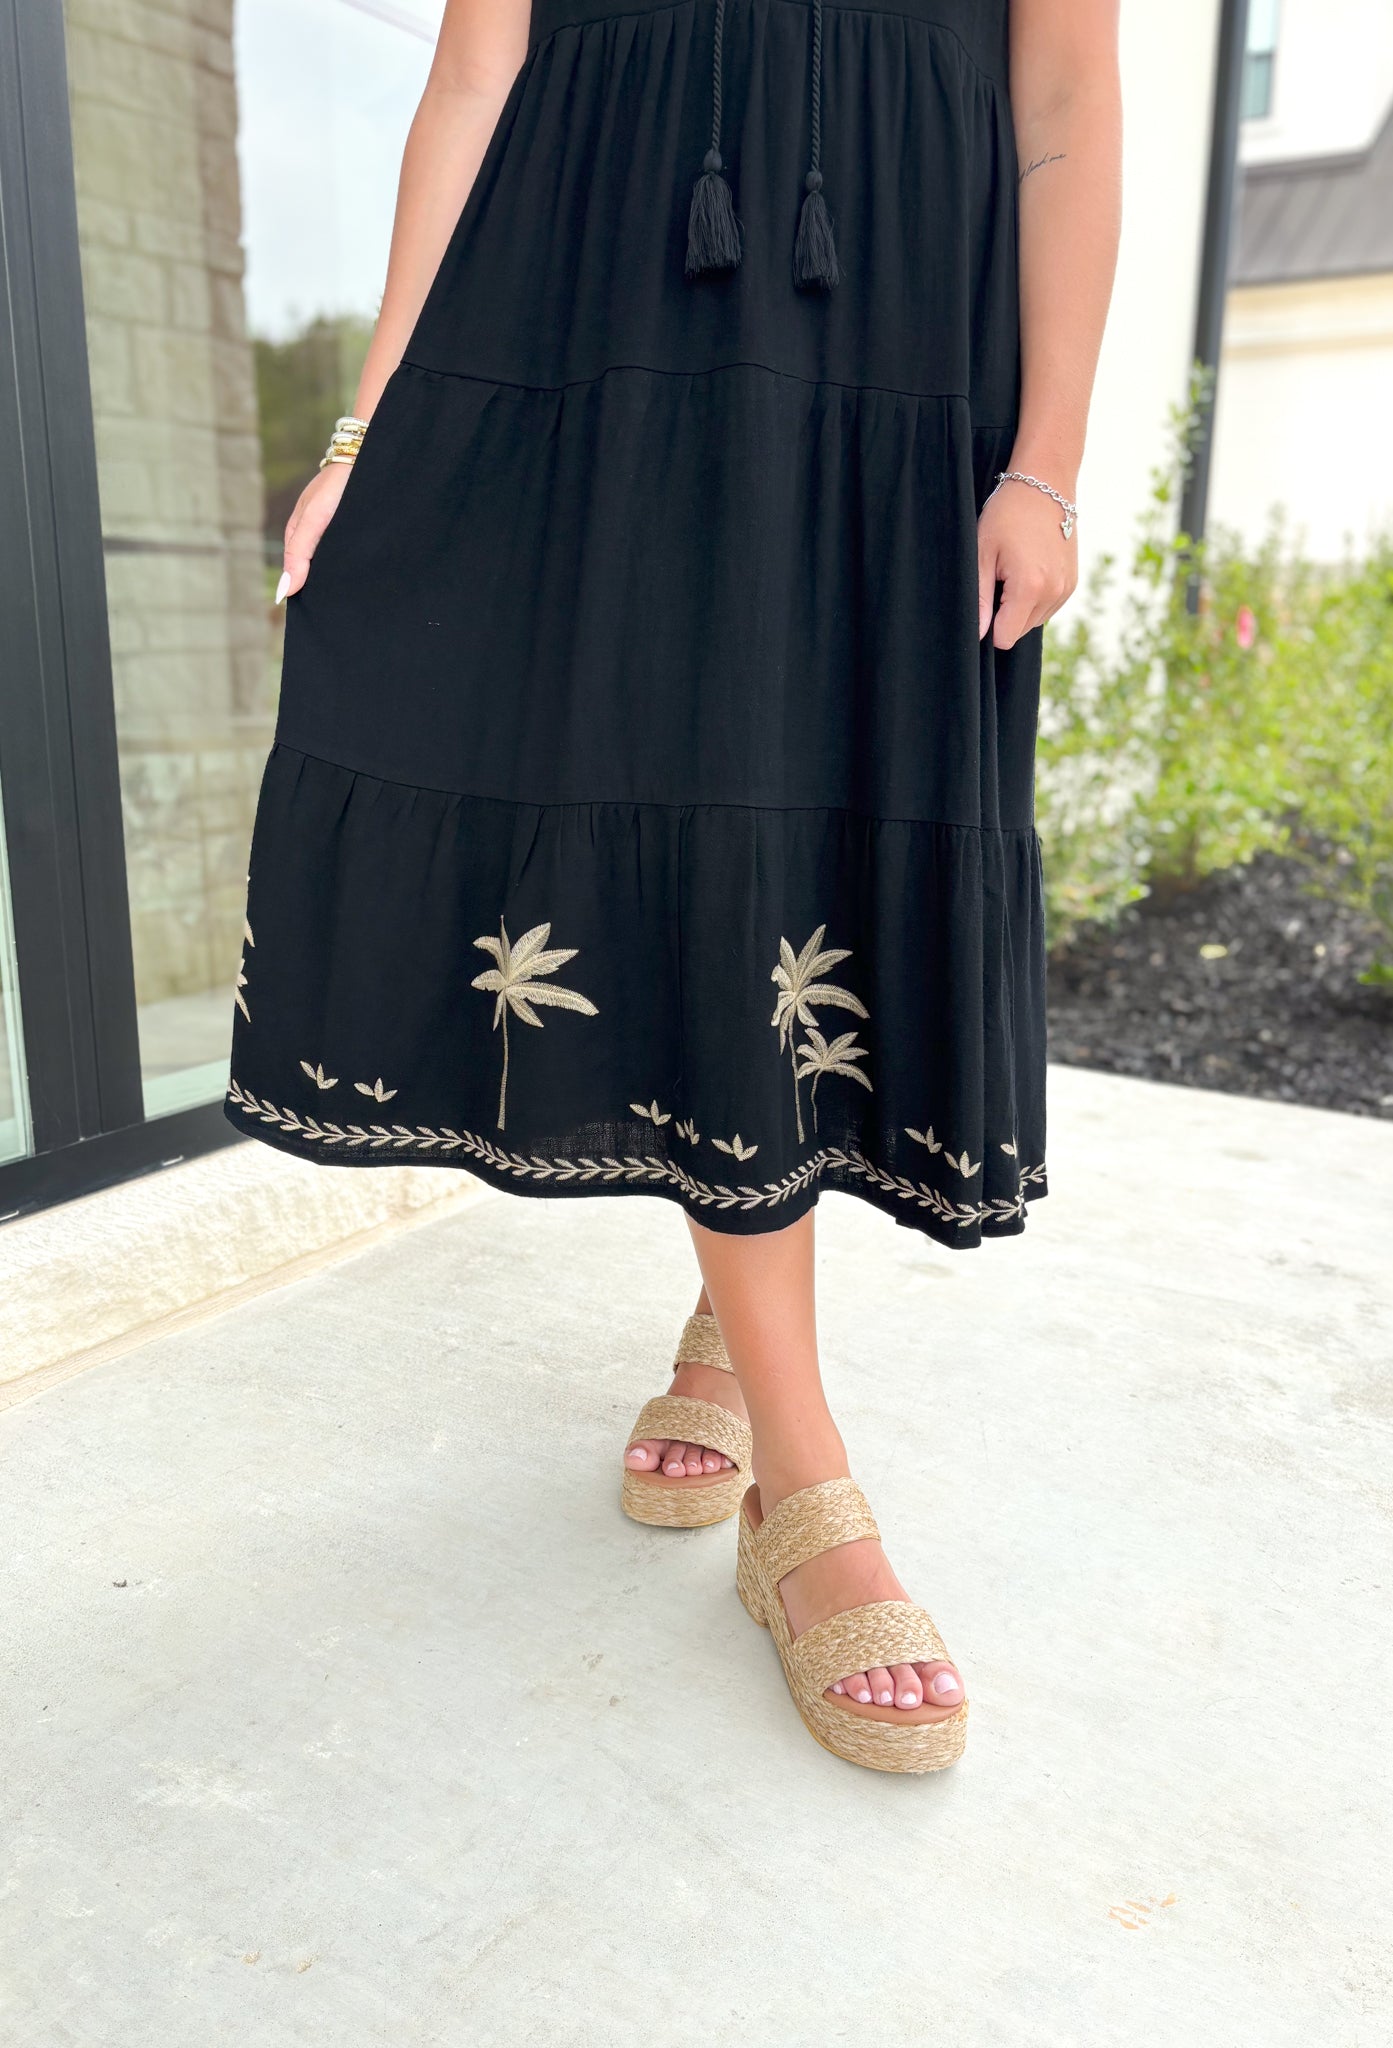 Palm Trees Please Midi Dress, black sleeveless tiered dress with v-neck, tan embroidered details around the neck and down the chest, tan embroidered palm leaves on the bottom tier of the dress 